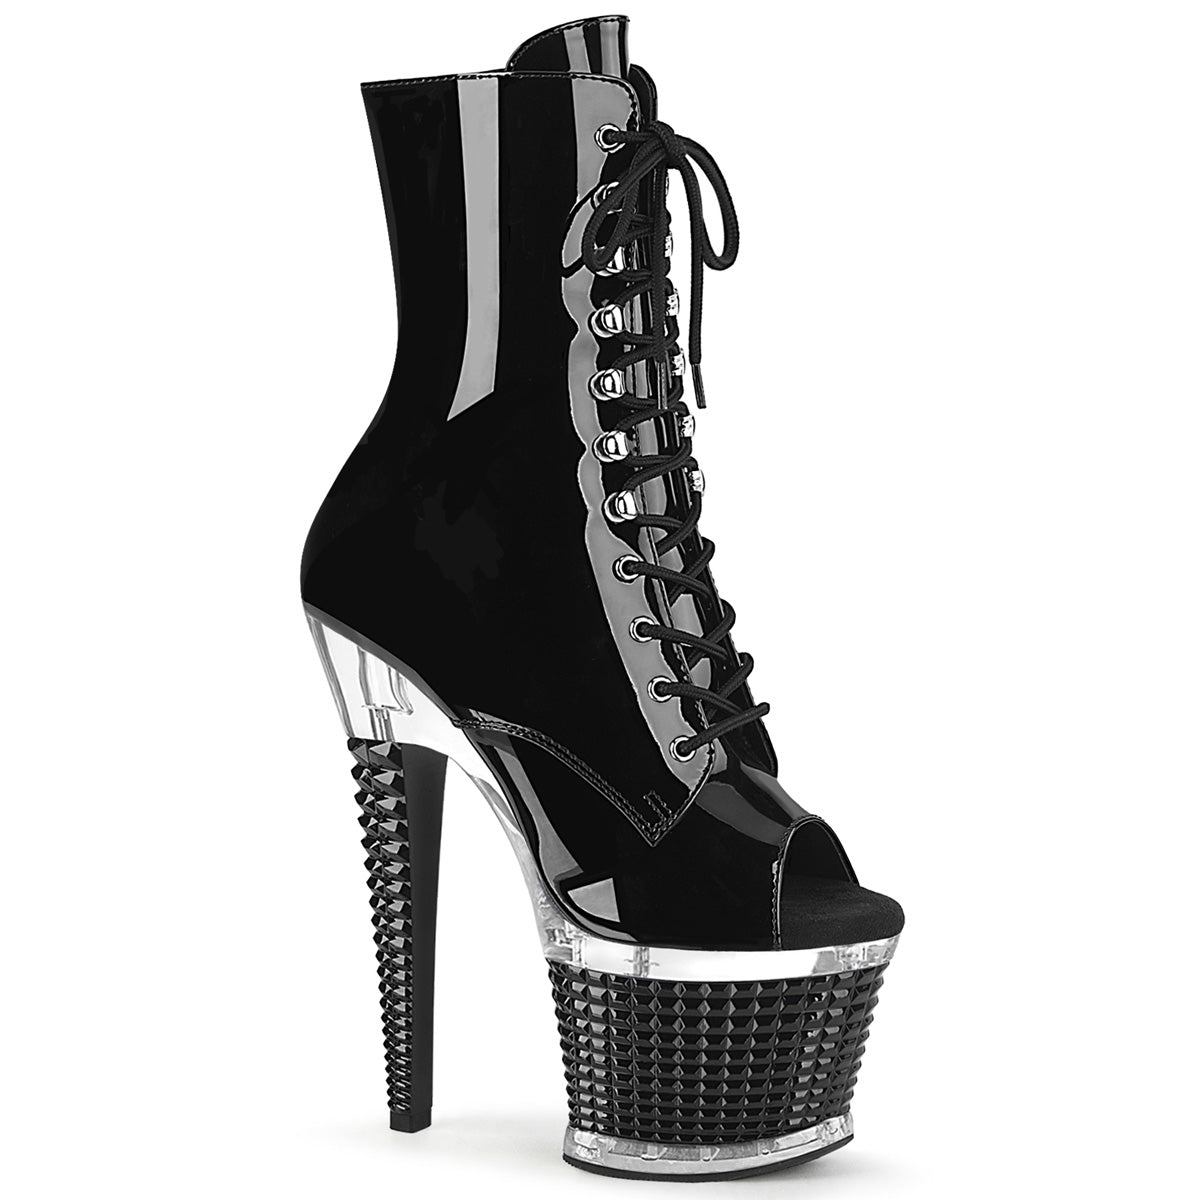 Pleaser SPECTATOR-1021 Black Pat-Clear-Black 7 Inch (178mm) Heel, 3 Inch (76mm) Textured Platform Open Toe Lace-Up Front Ankle Boot, Inside Zip Closure